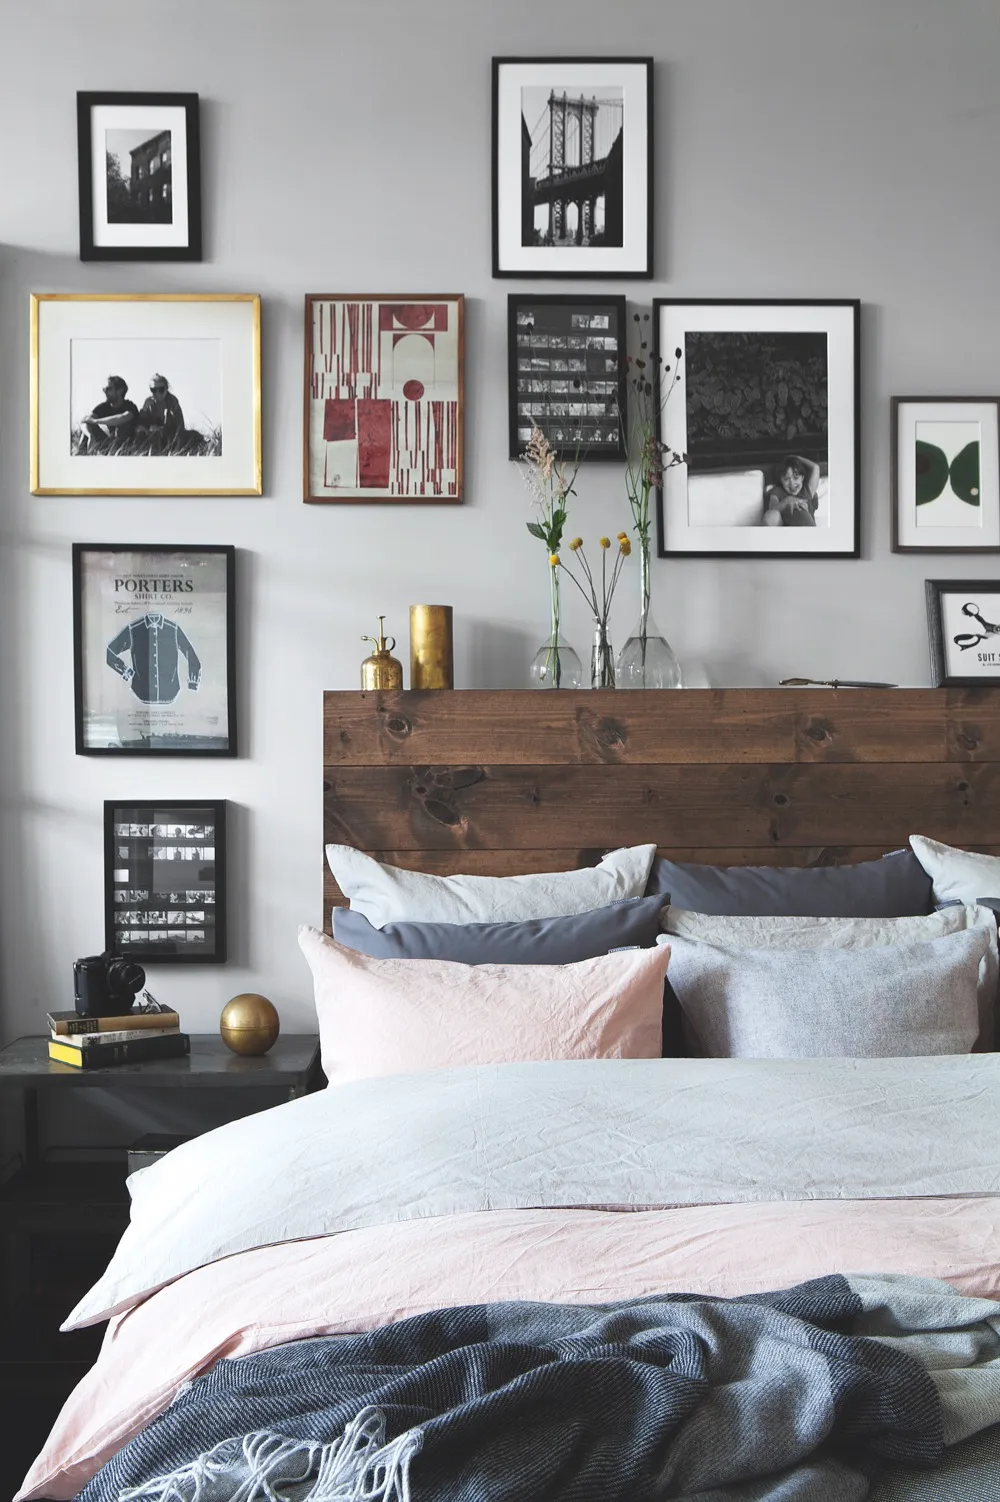 A gallery wall of prints and photographs hanging above a double bed with a rustic wooden headboard